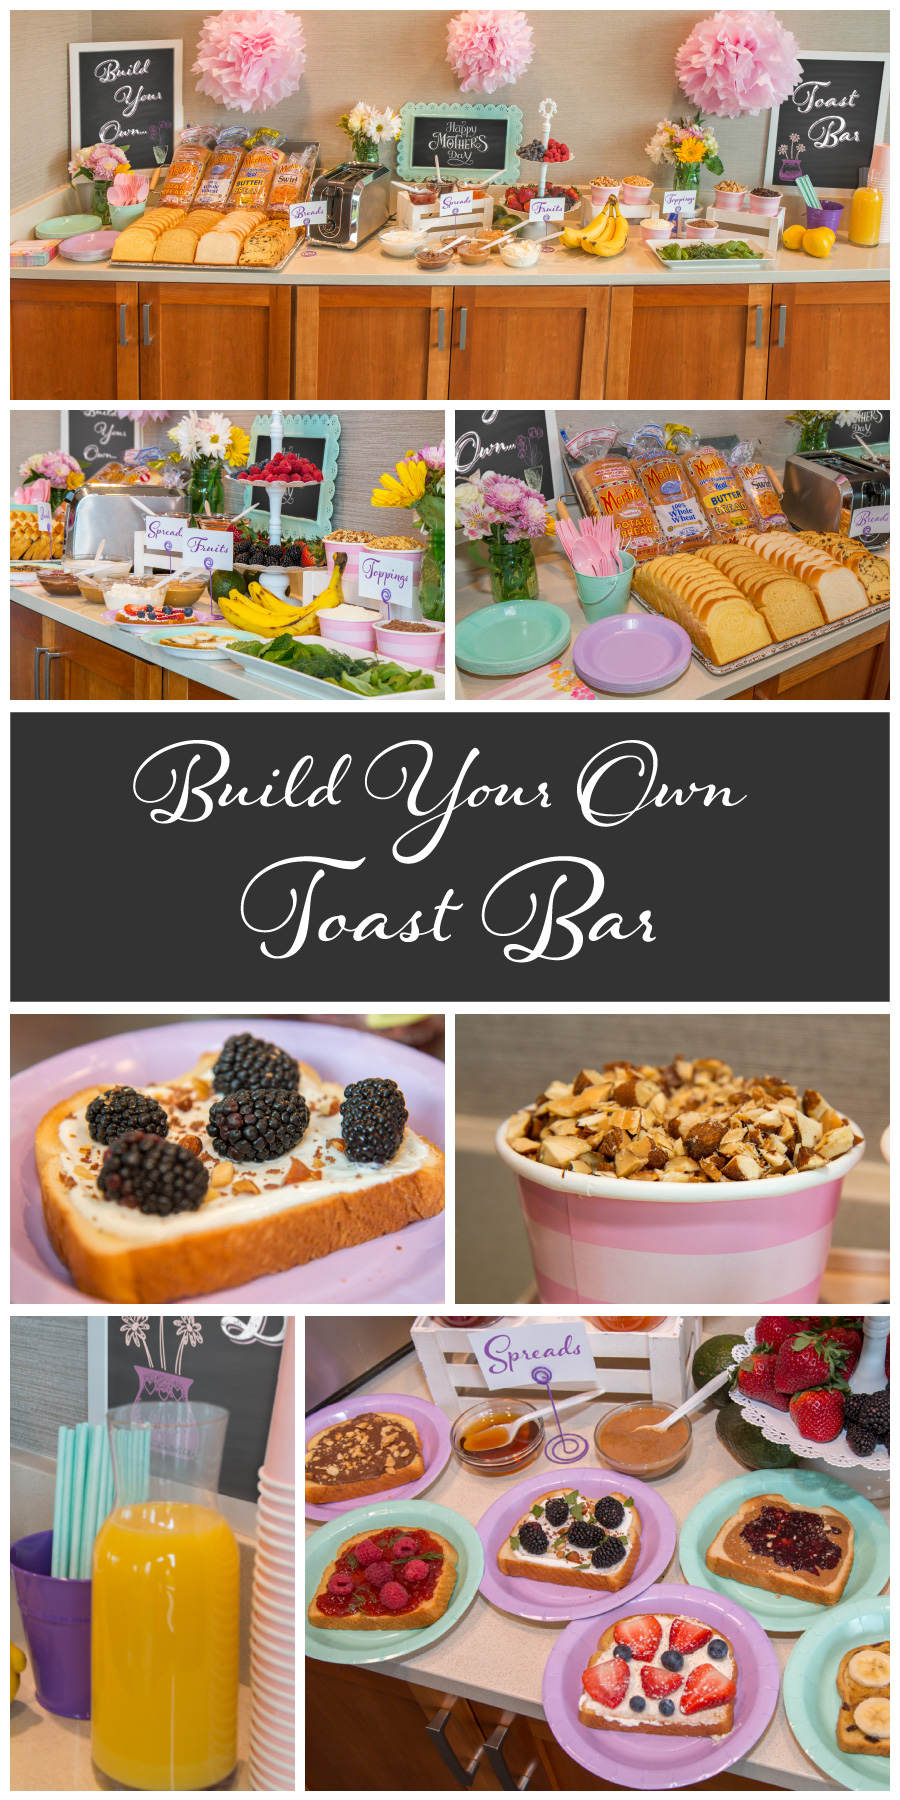 Mother's Day Build-Your-Own Toast Bar: Breads, Toppings, Fruits, Spreads, and More!